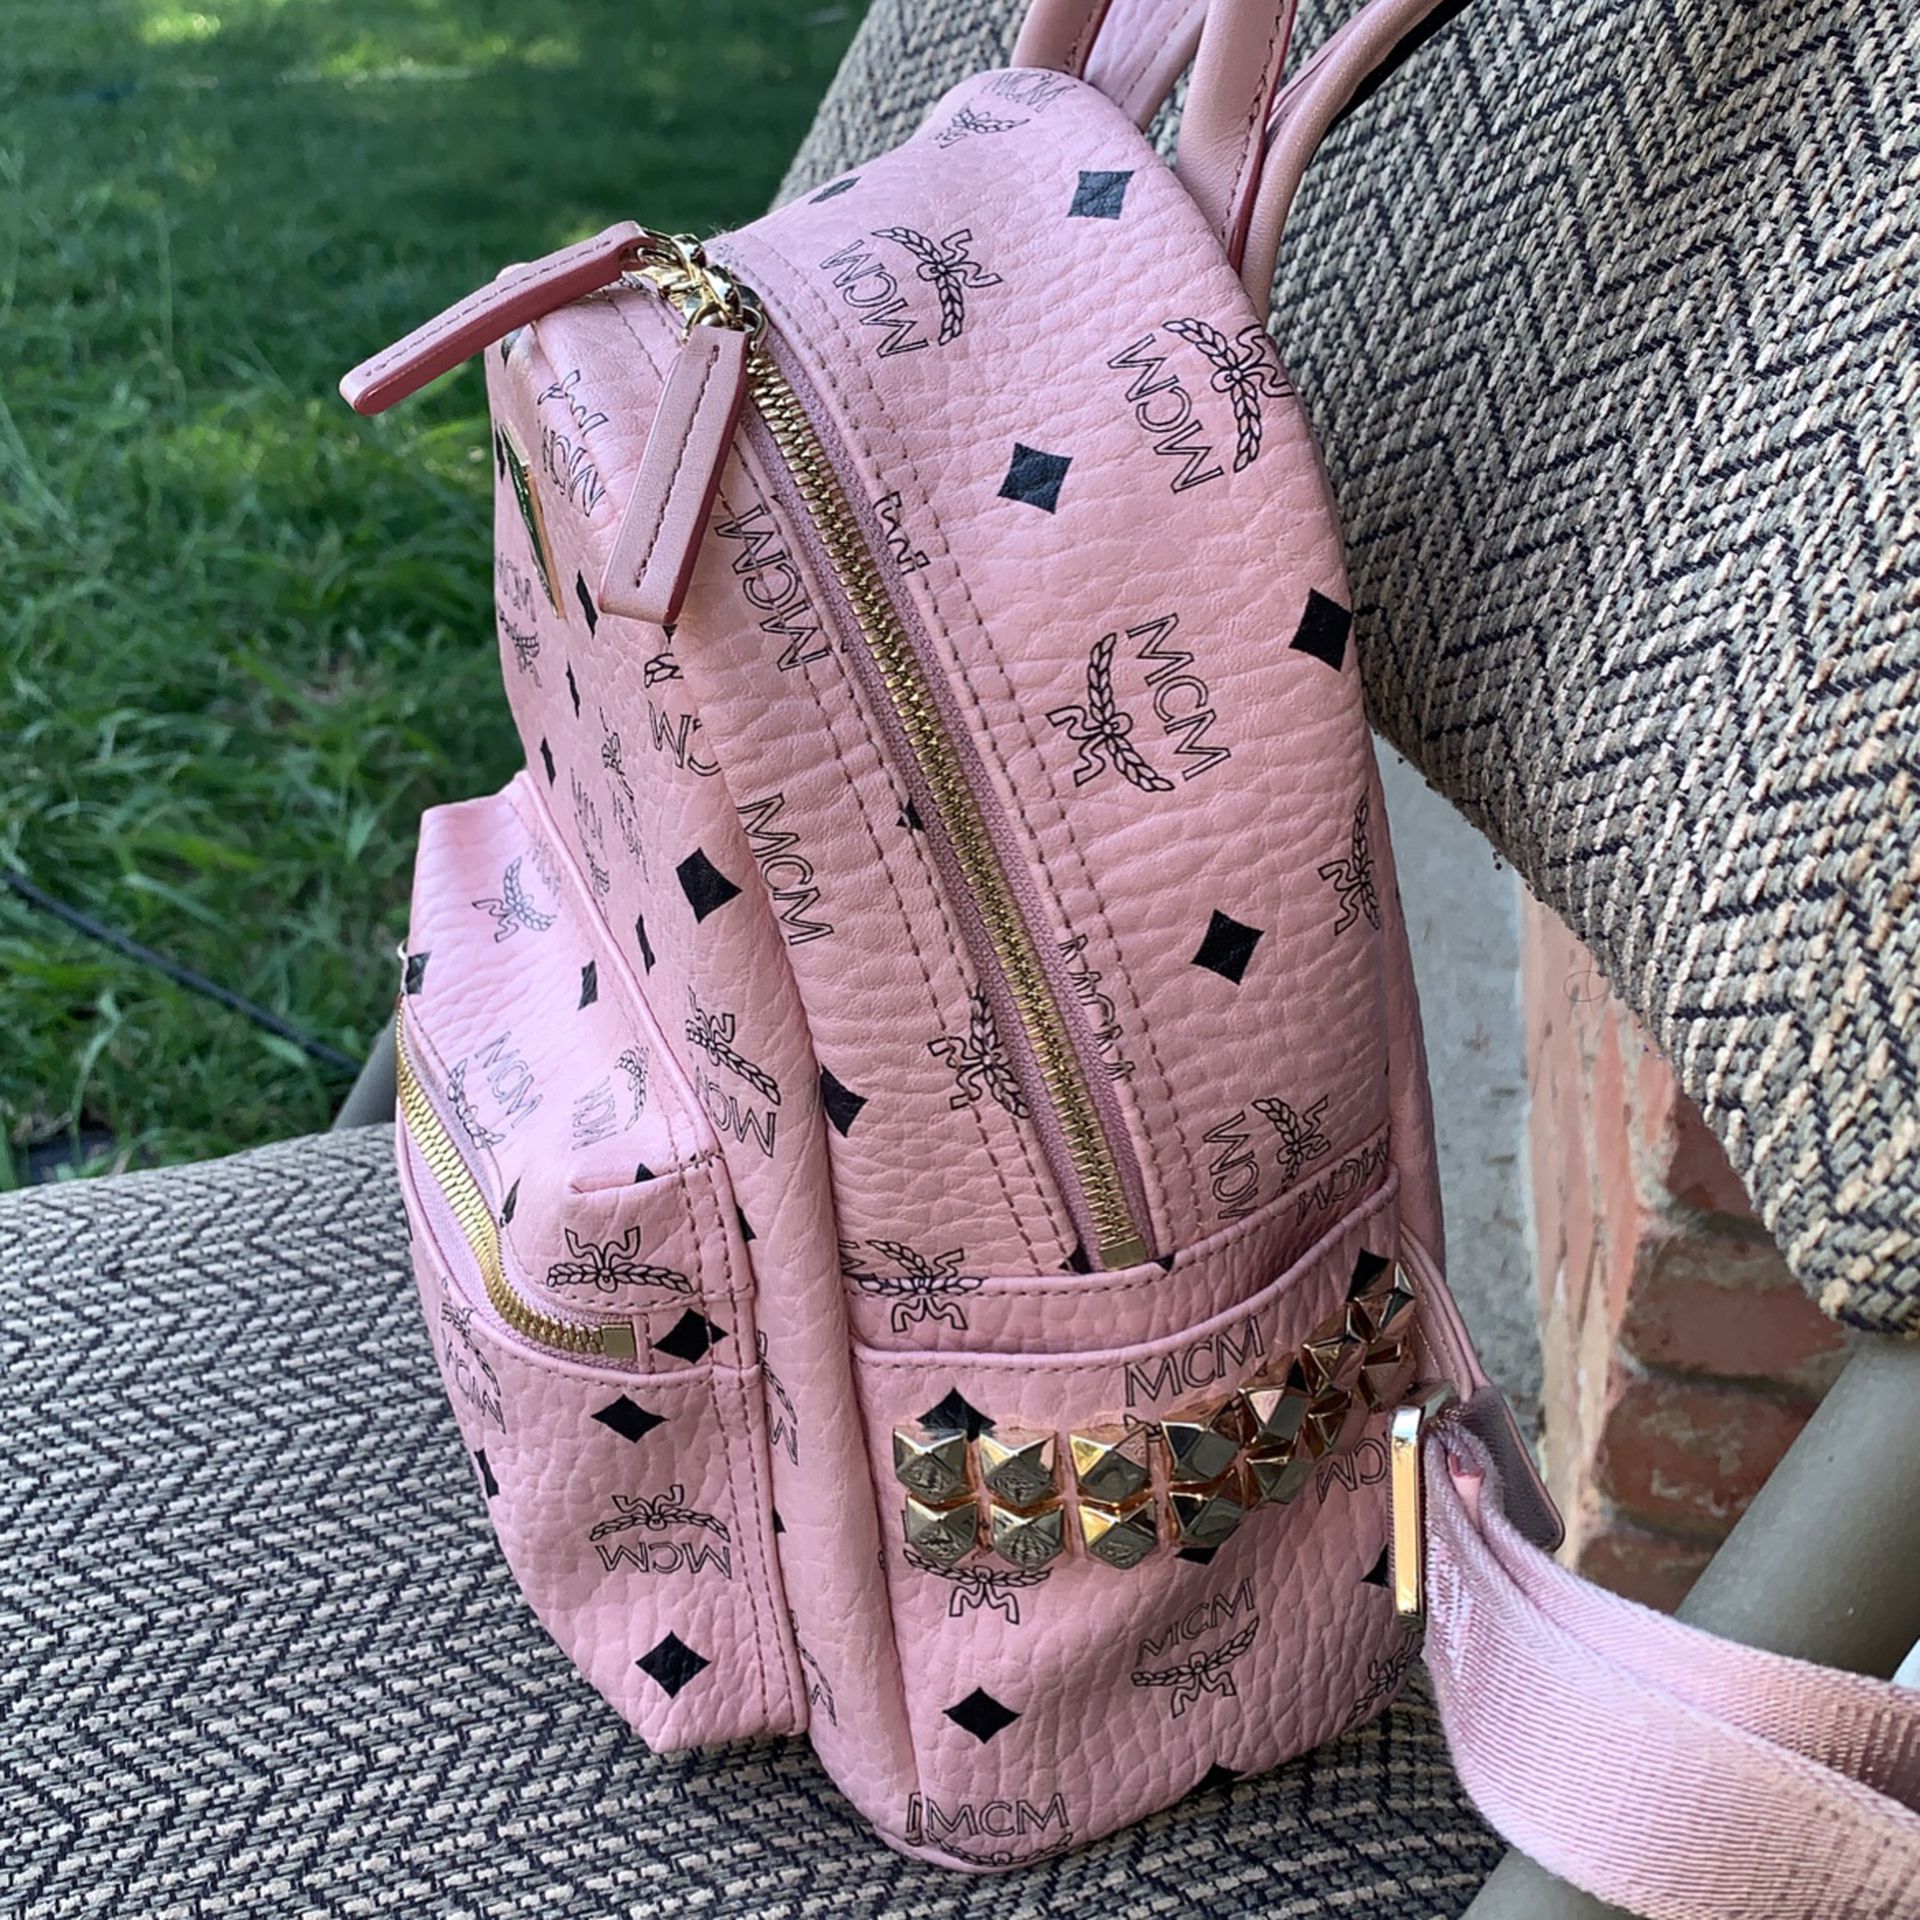 Girls Pink MCM Backpack (AUTHENTIC)